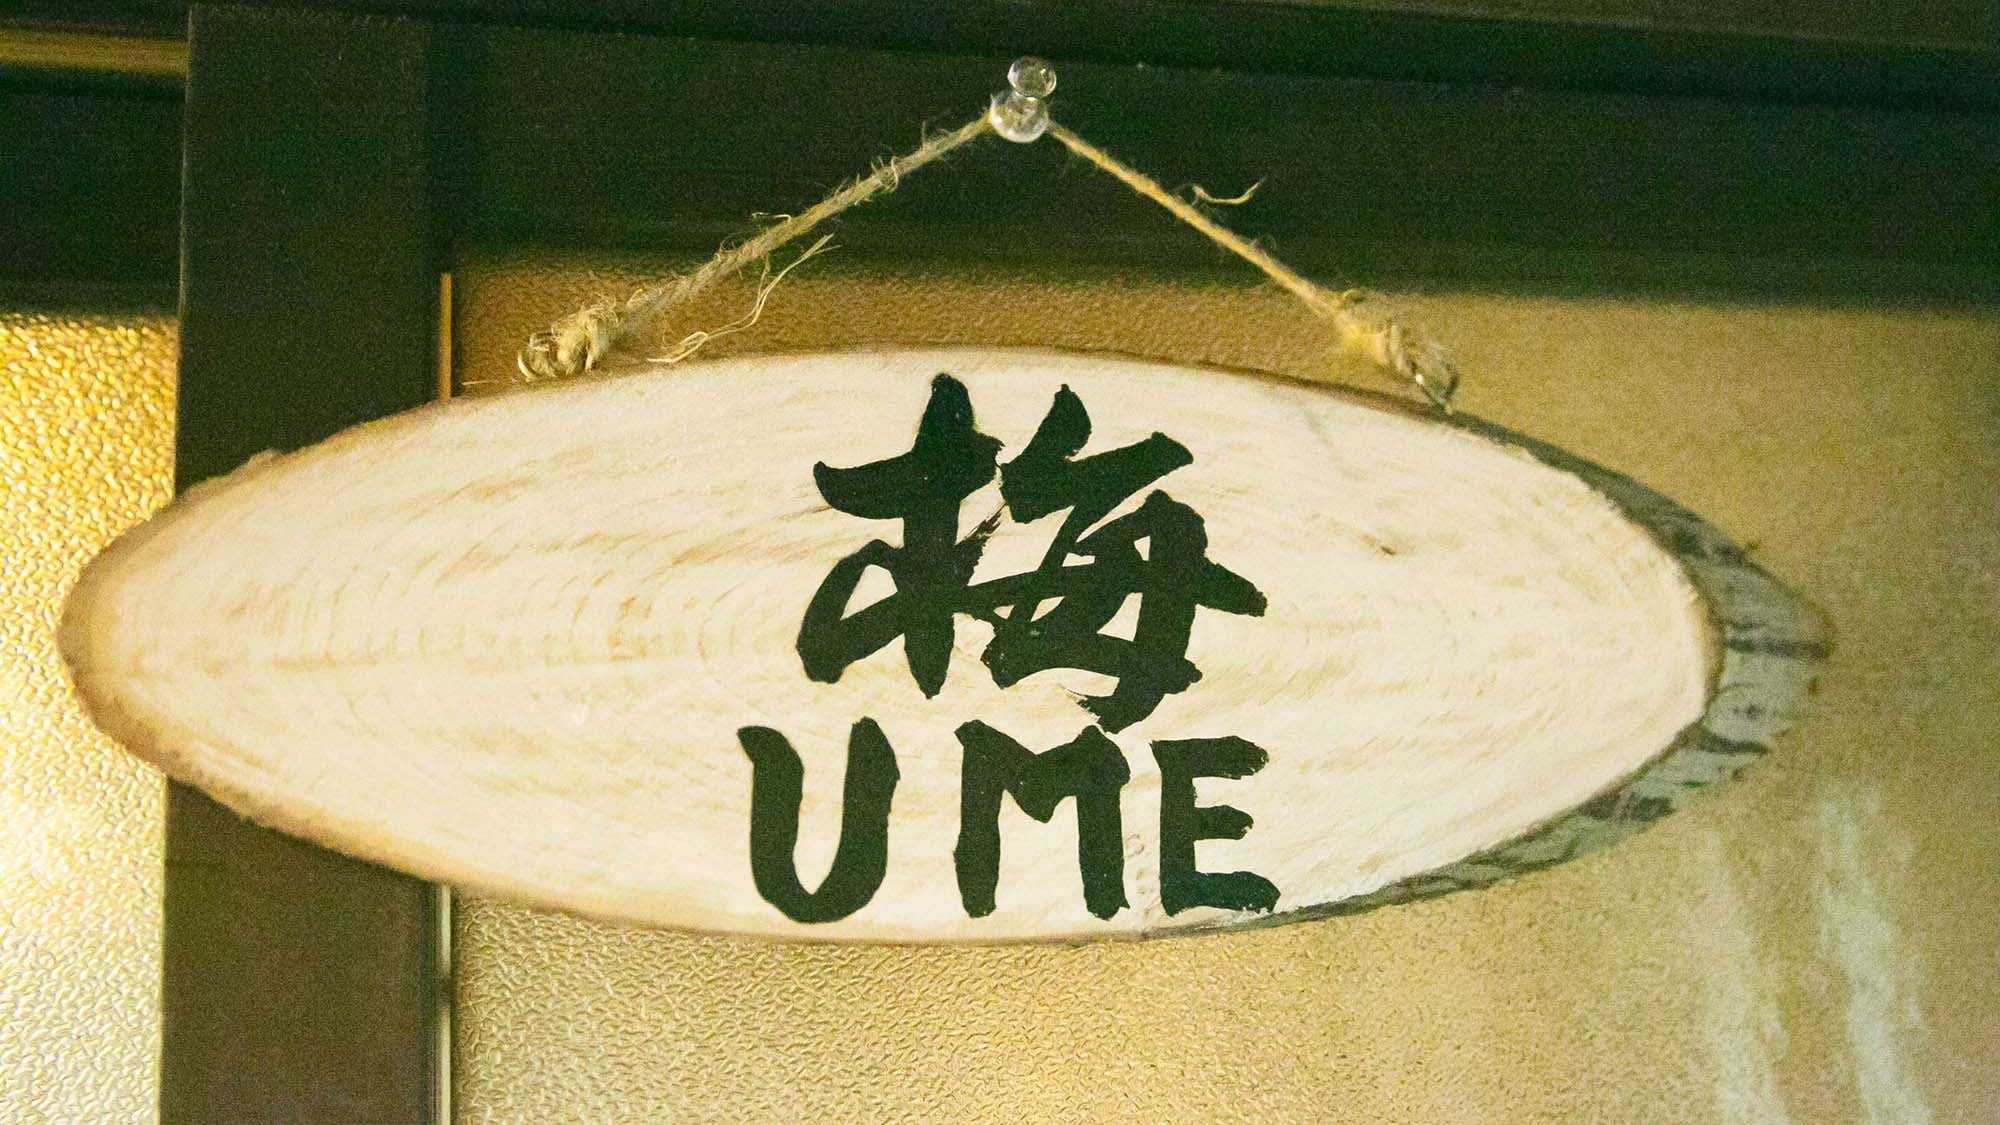 ・ Click here for the "Ume" room